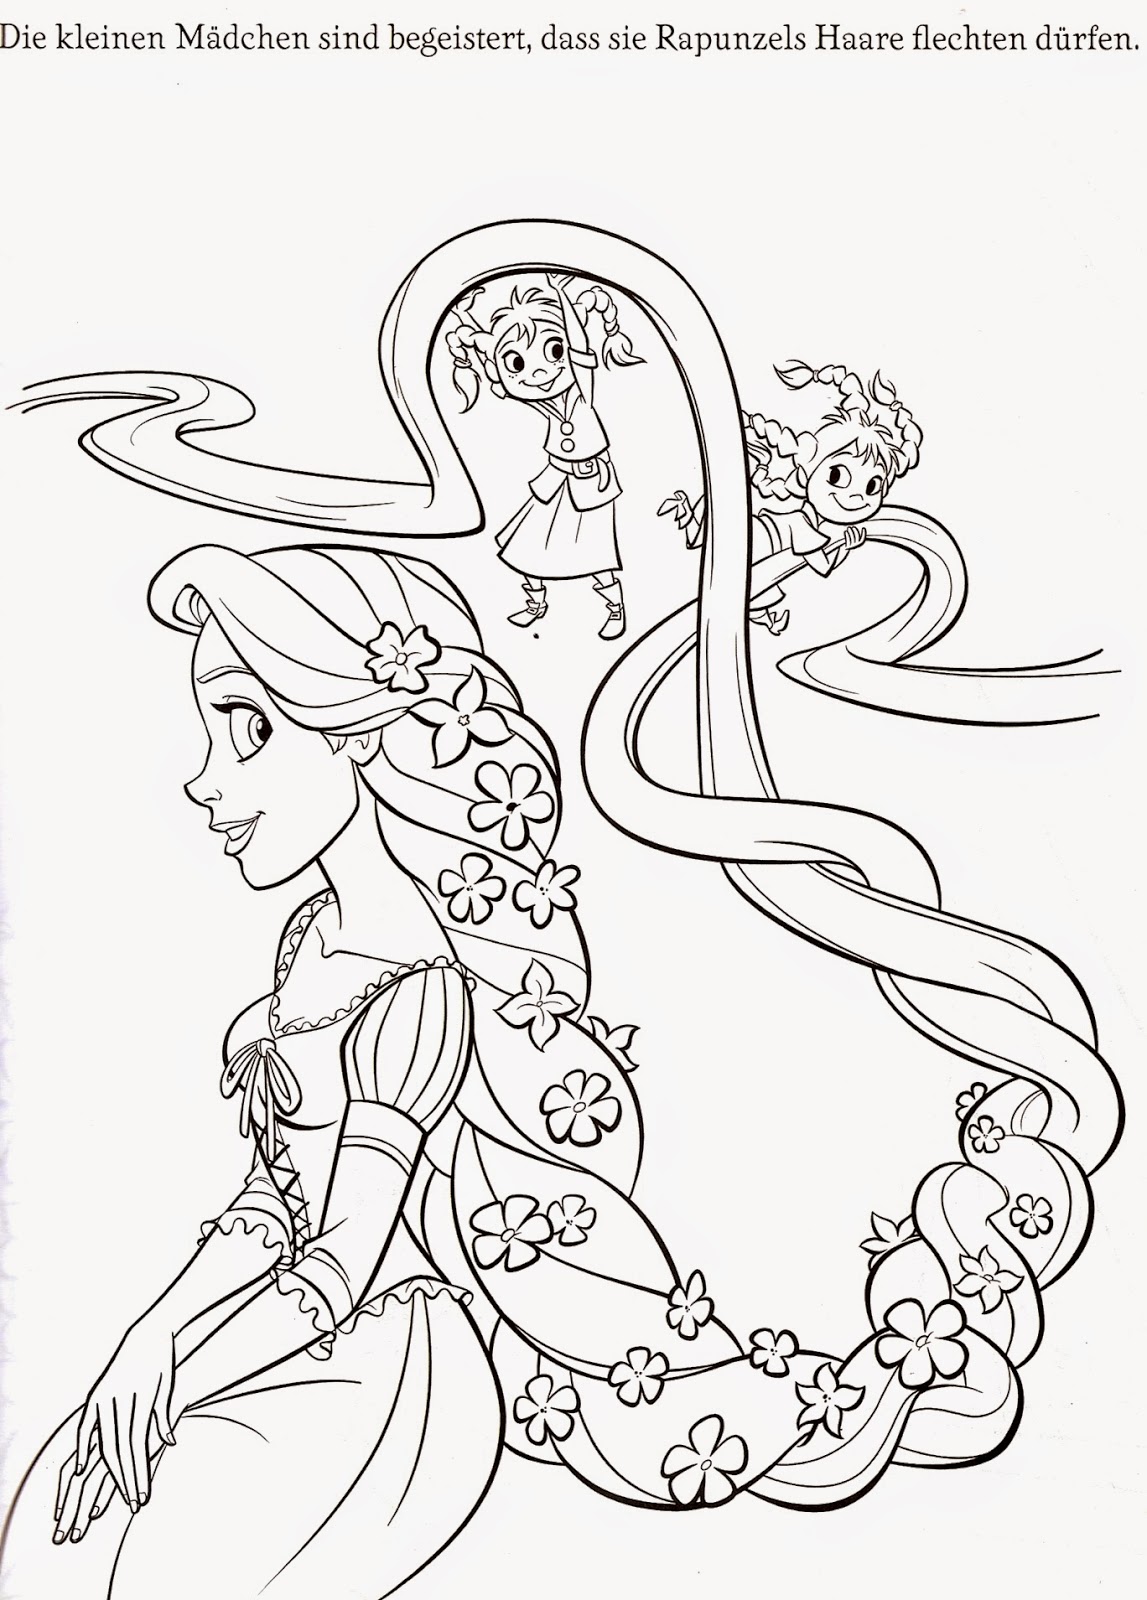 Download Coloring Pages: "Tangled" Free Printable Coloring Pages of ...